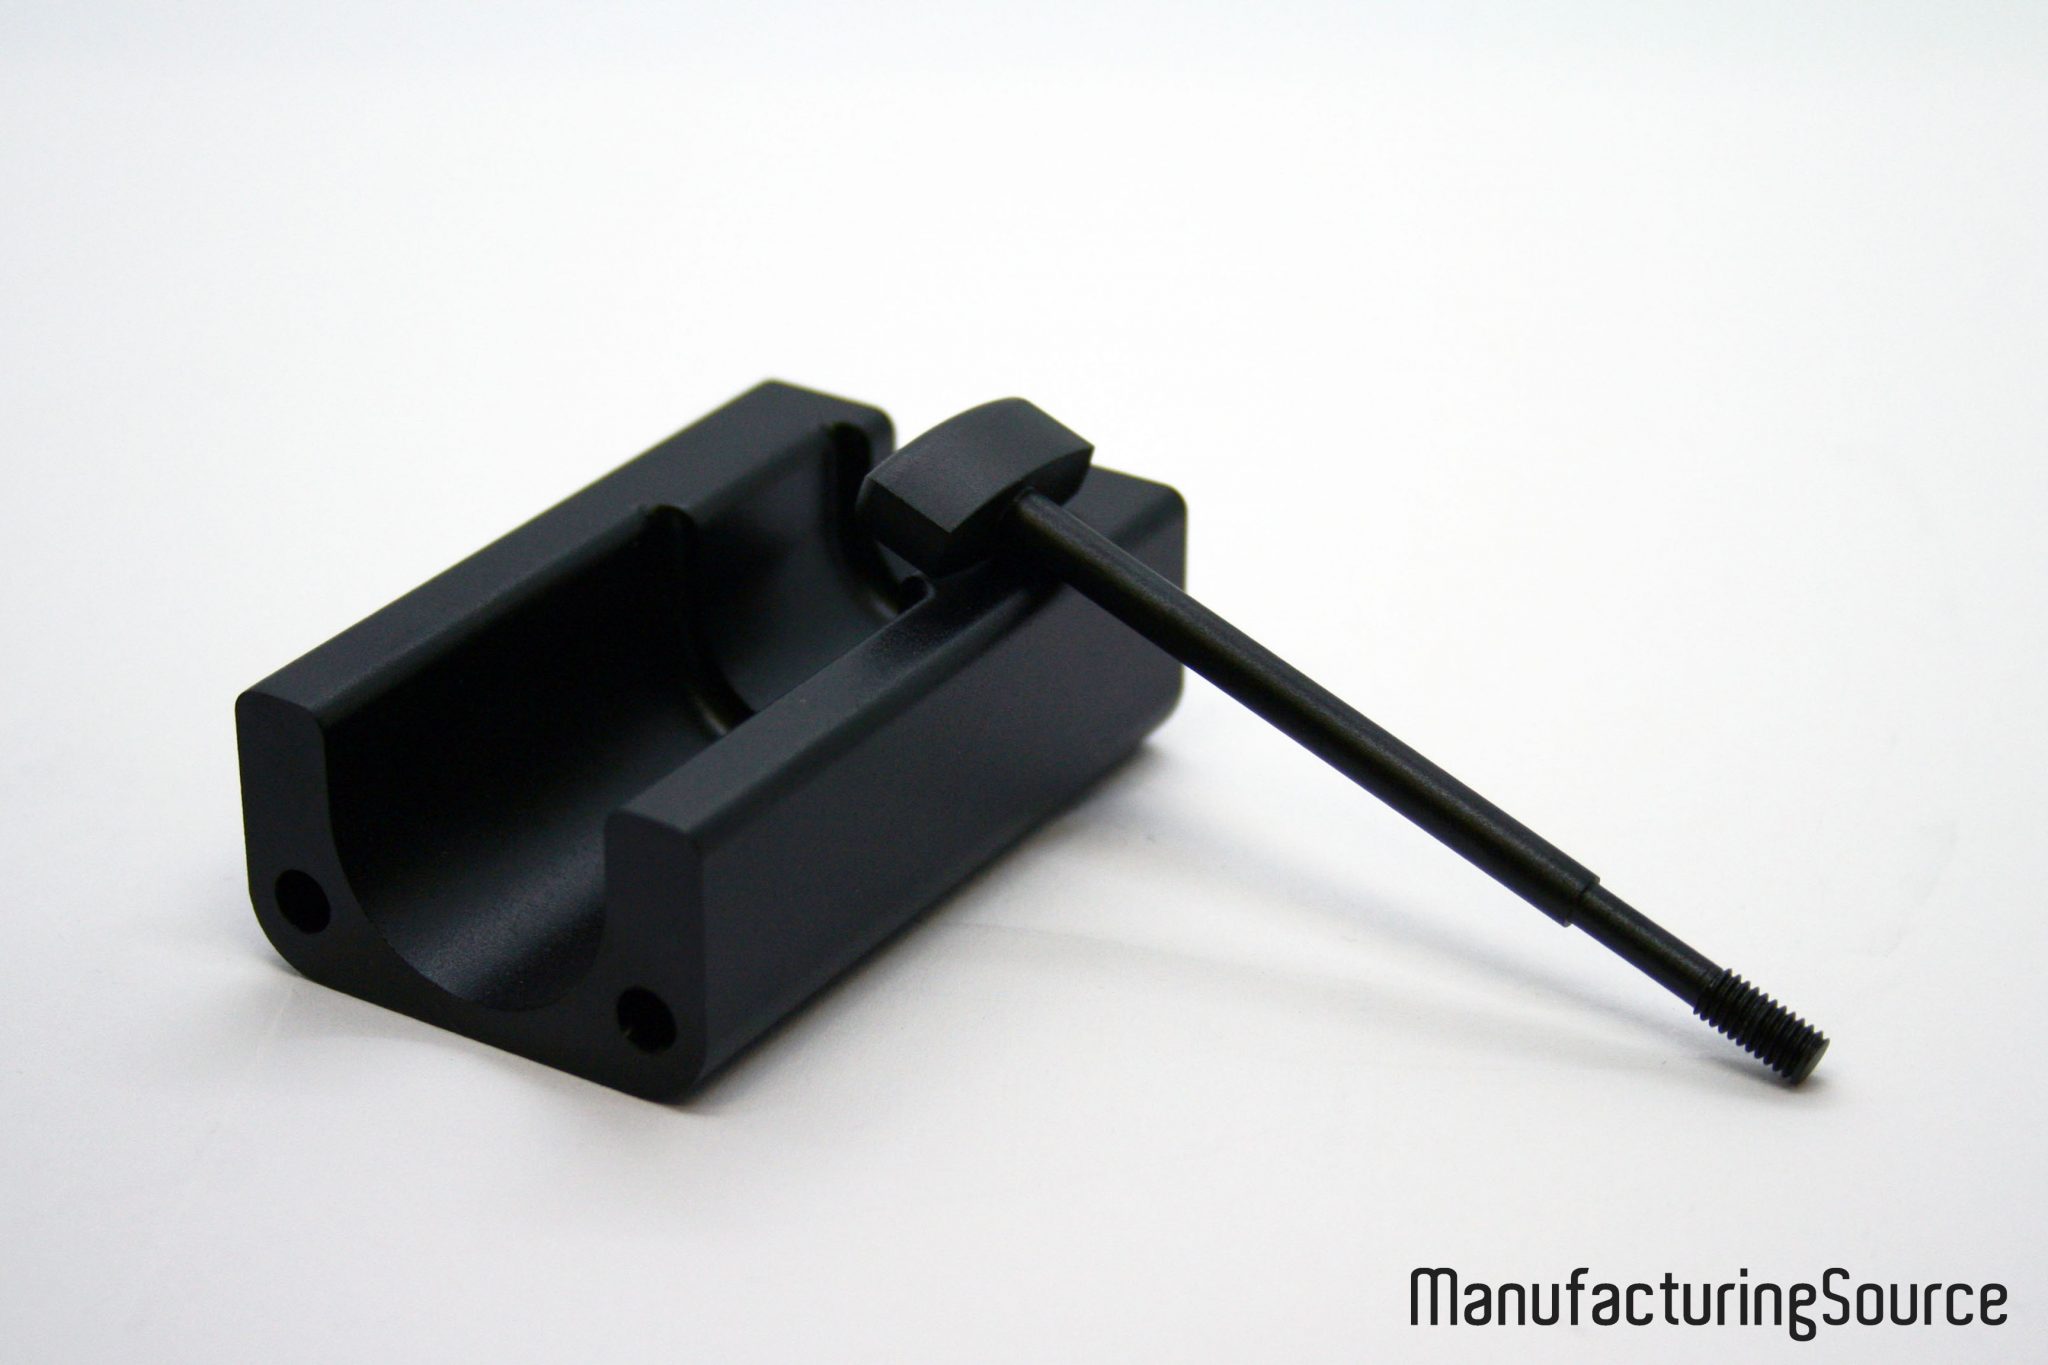 A plastic component made by Manufacturing Source. Image via Manufacturing Source.